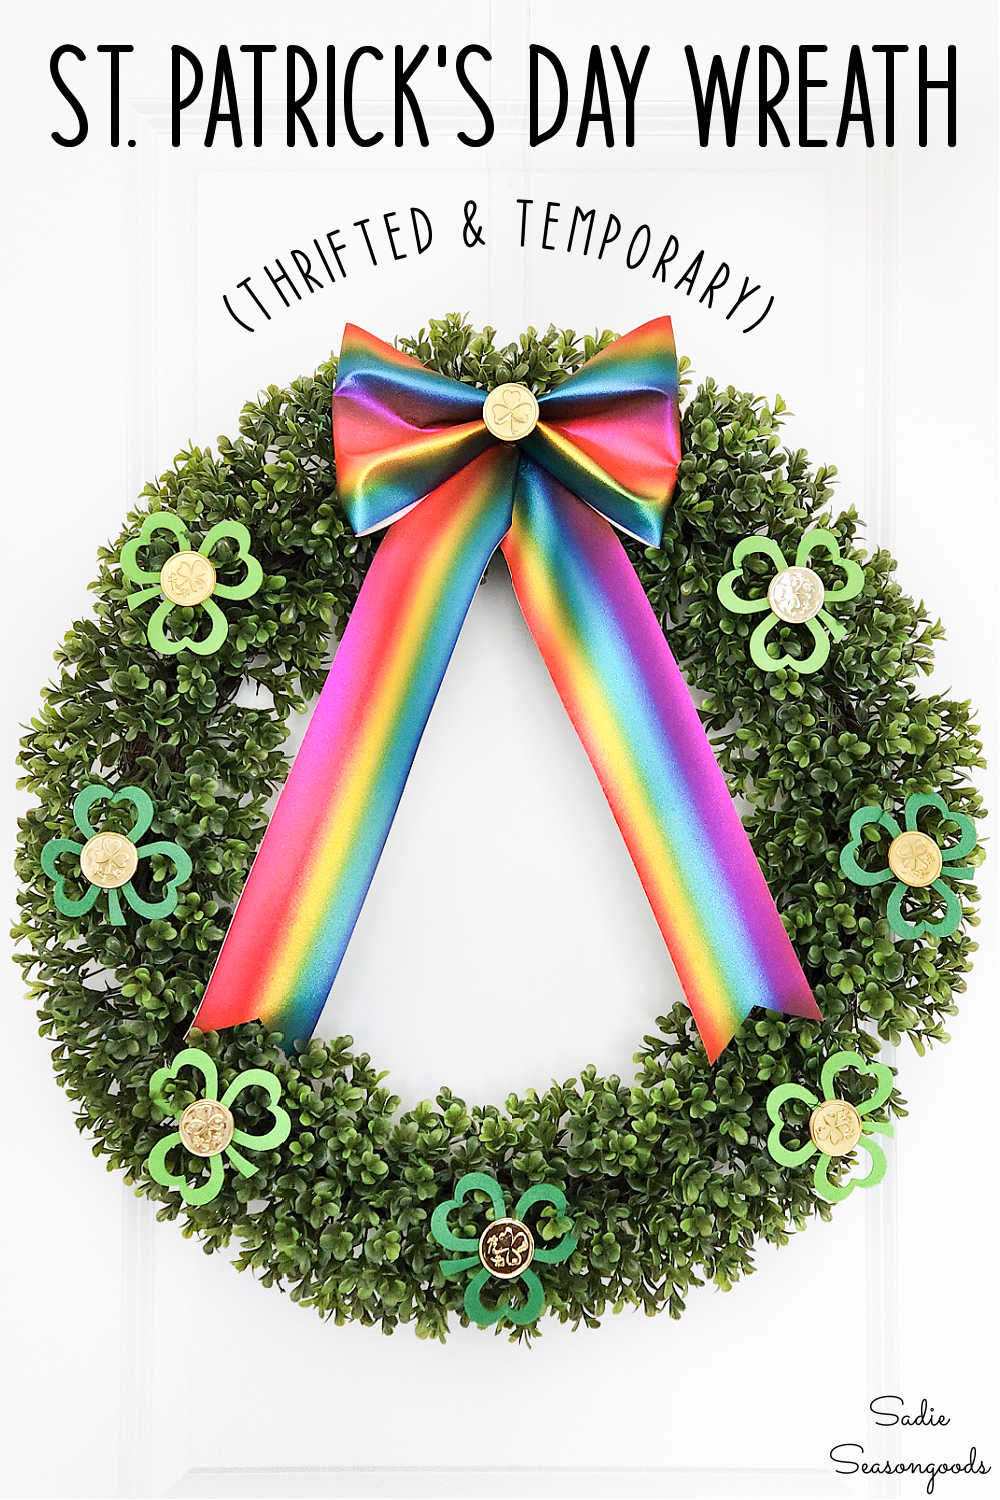 celebrating st. patrick's day with a diy wreath